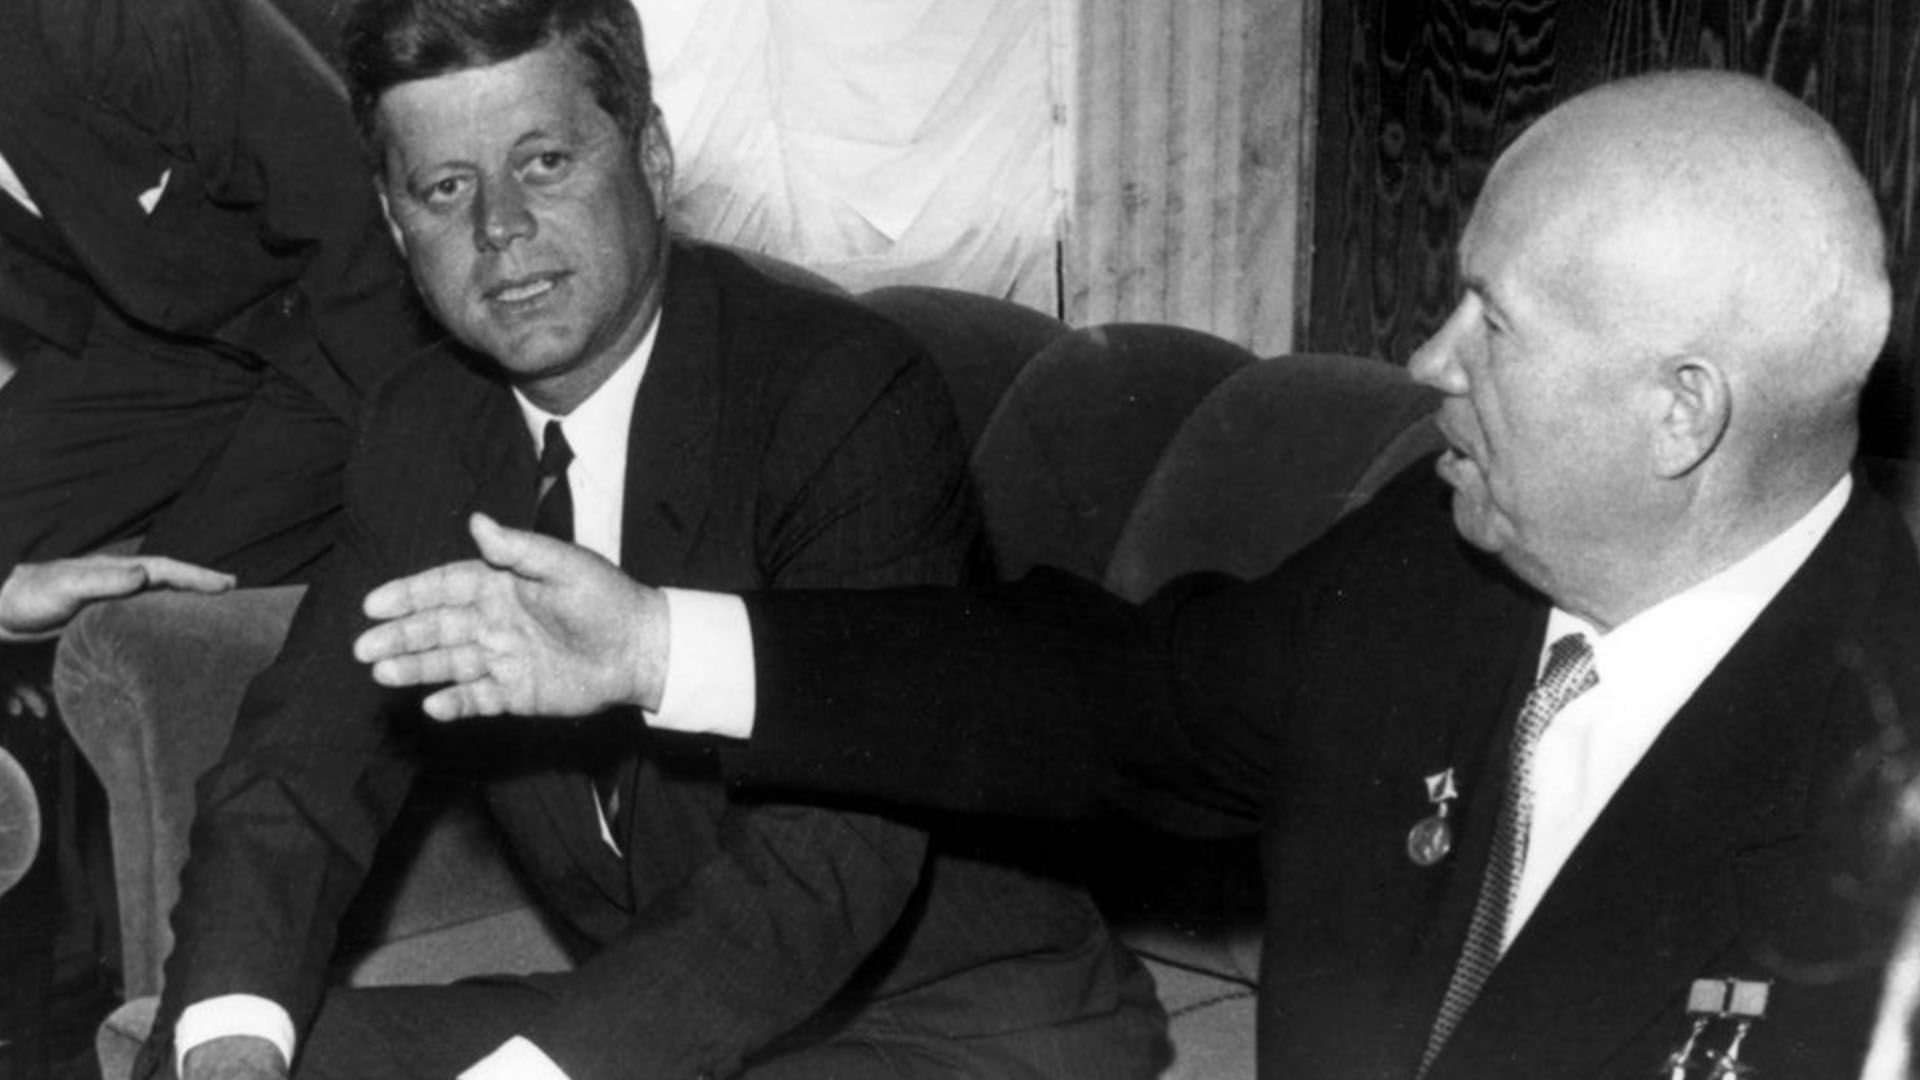 JFK Was Completely Unprepared For His Summit with Khrushchev